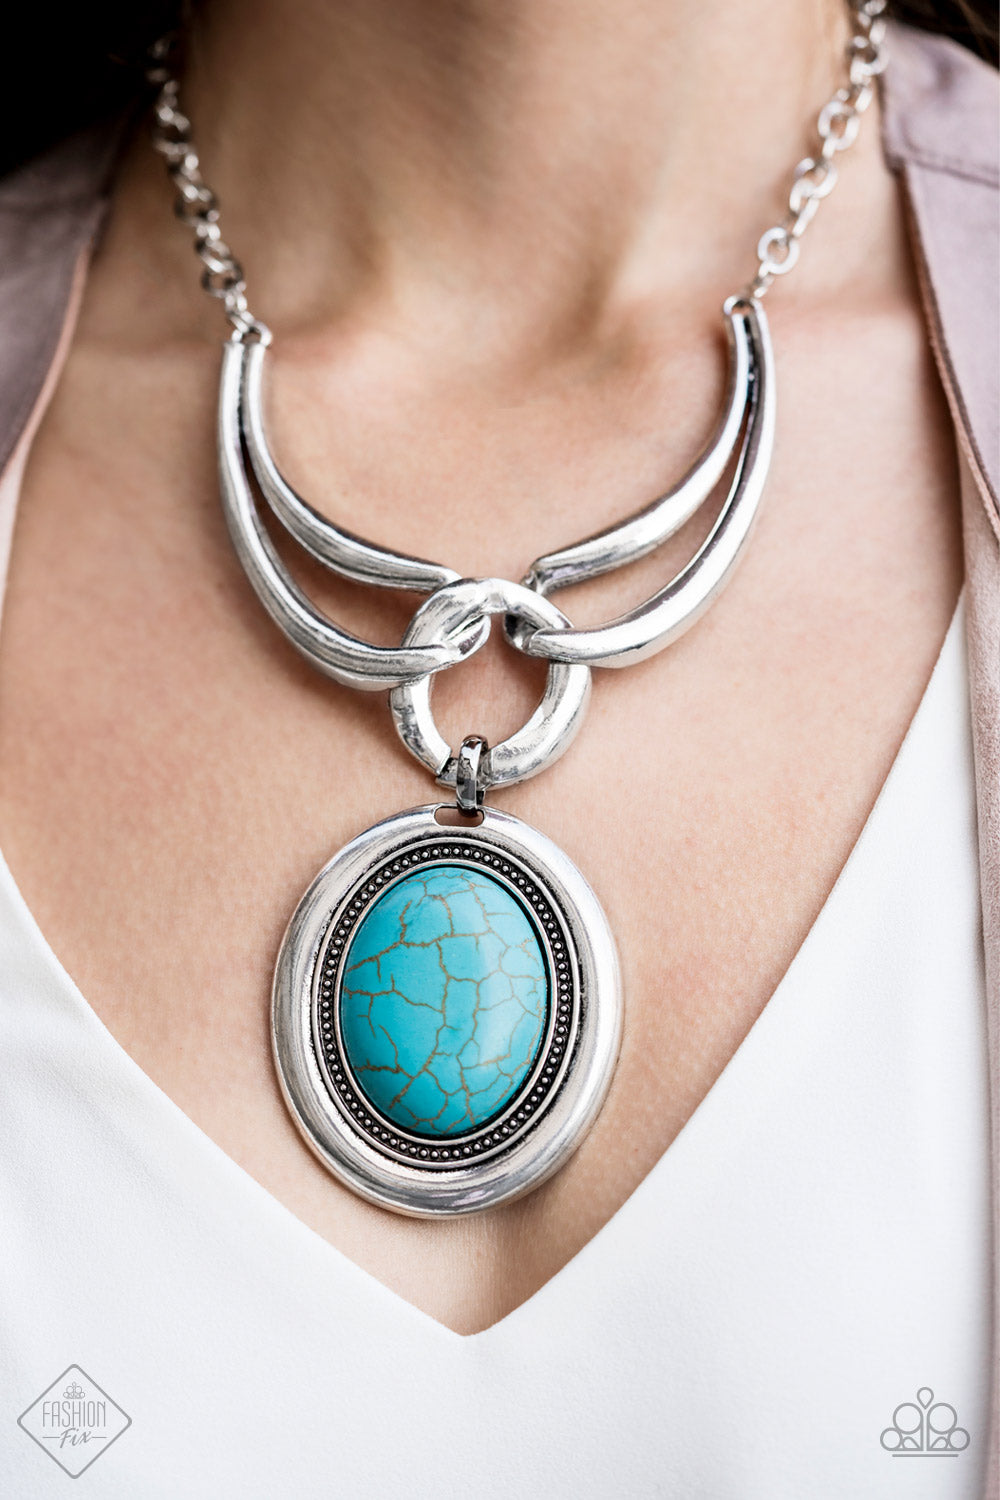 SIMPLY SANTA FE - MAY 2019 BLUE TURQUOISE HAMMERED CUFF BRACELET HOOPS OVAL PENDANT NECKLACE